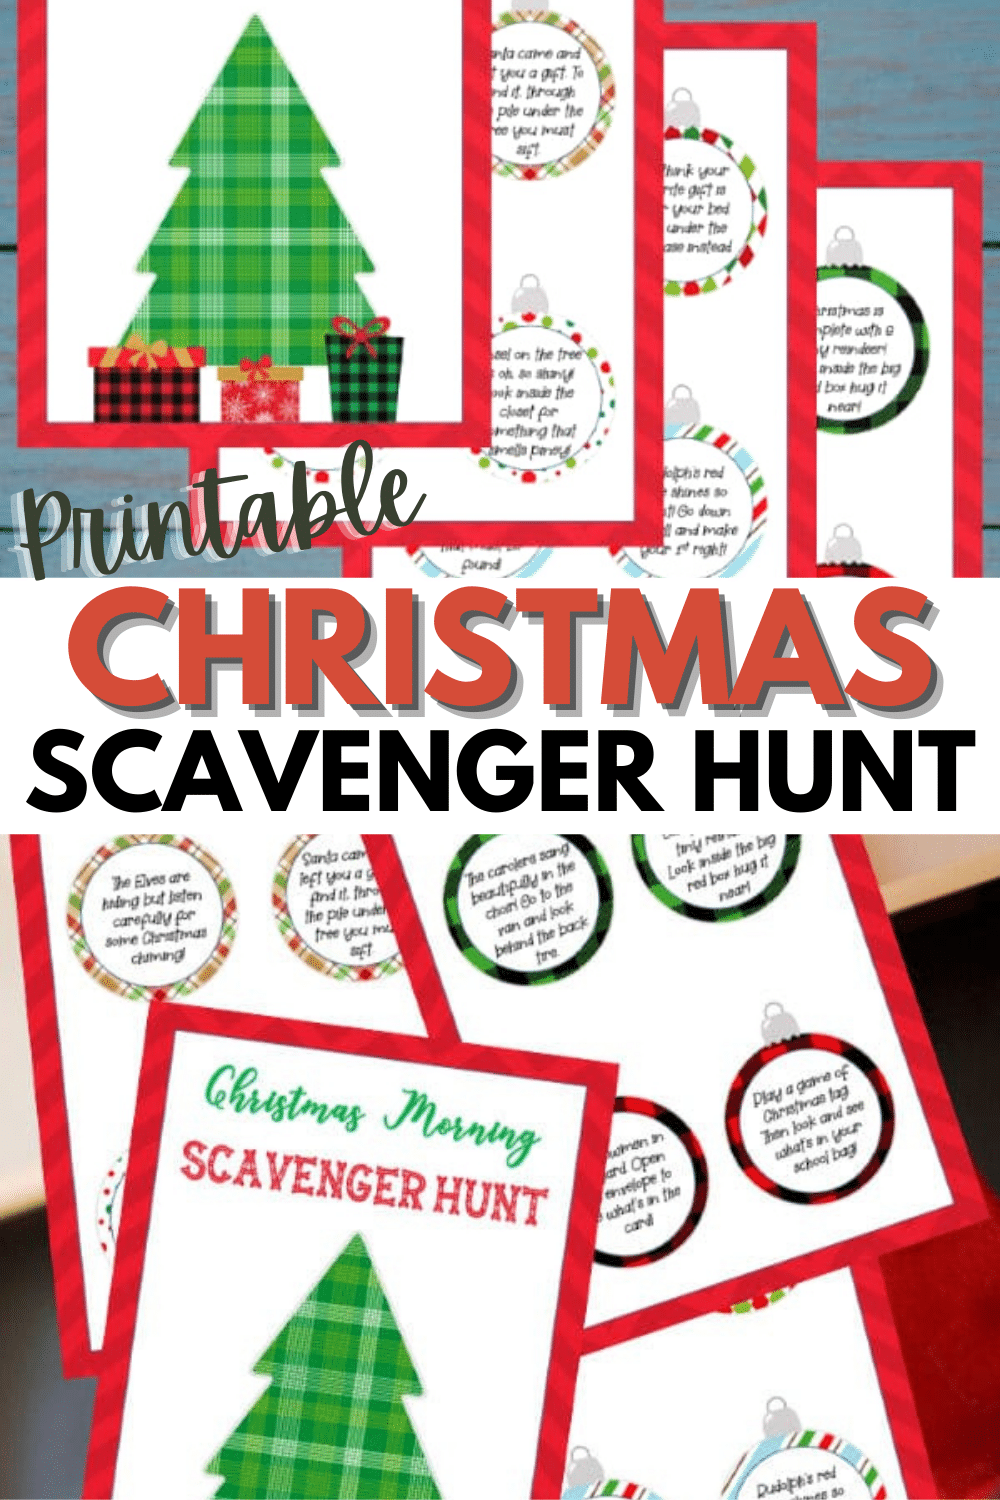 These free printable Christmas scavenger hunt riddles is a great way to make Christmas extra special. A fun way to stay entertained during the holidays. #Christmas #scavengerhunt #printables via @wondermomwannab